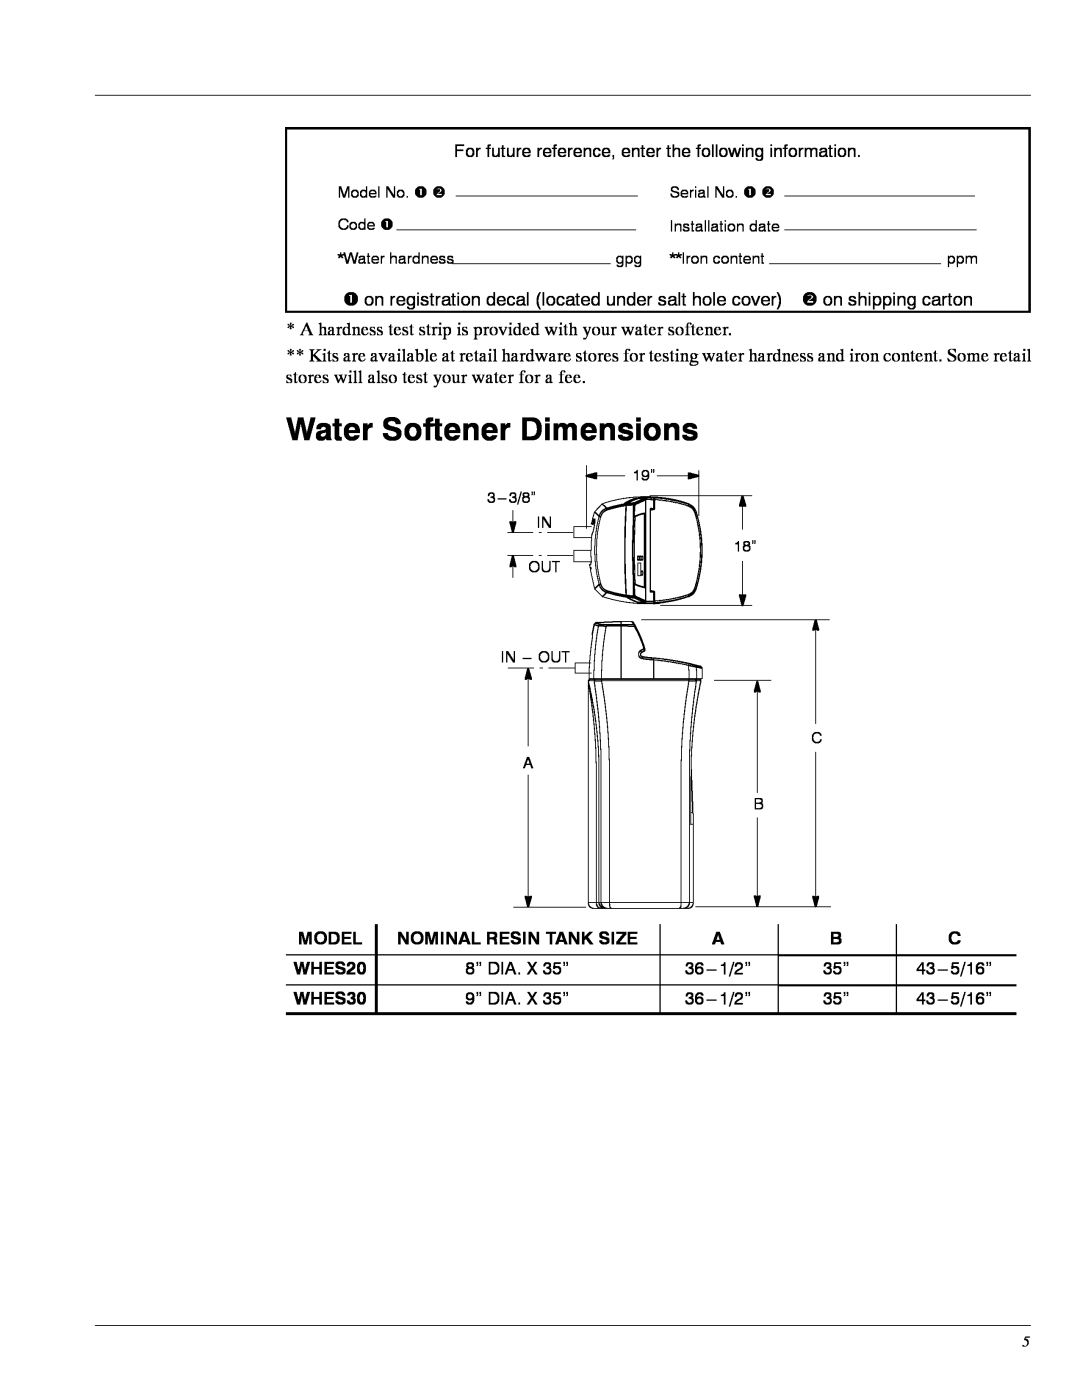 Whirlpool WHES20 manual Water Softener Dimensions, Model, Nominal Resin Tank Size, 8” DIA. X 35”, WHES30, 9” DIA. X 35” 